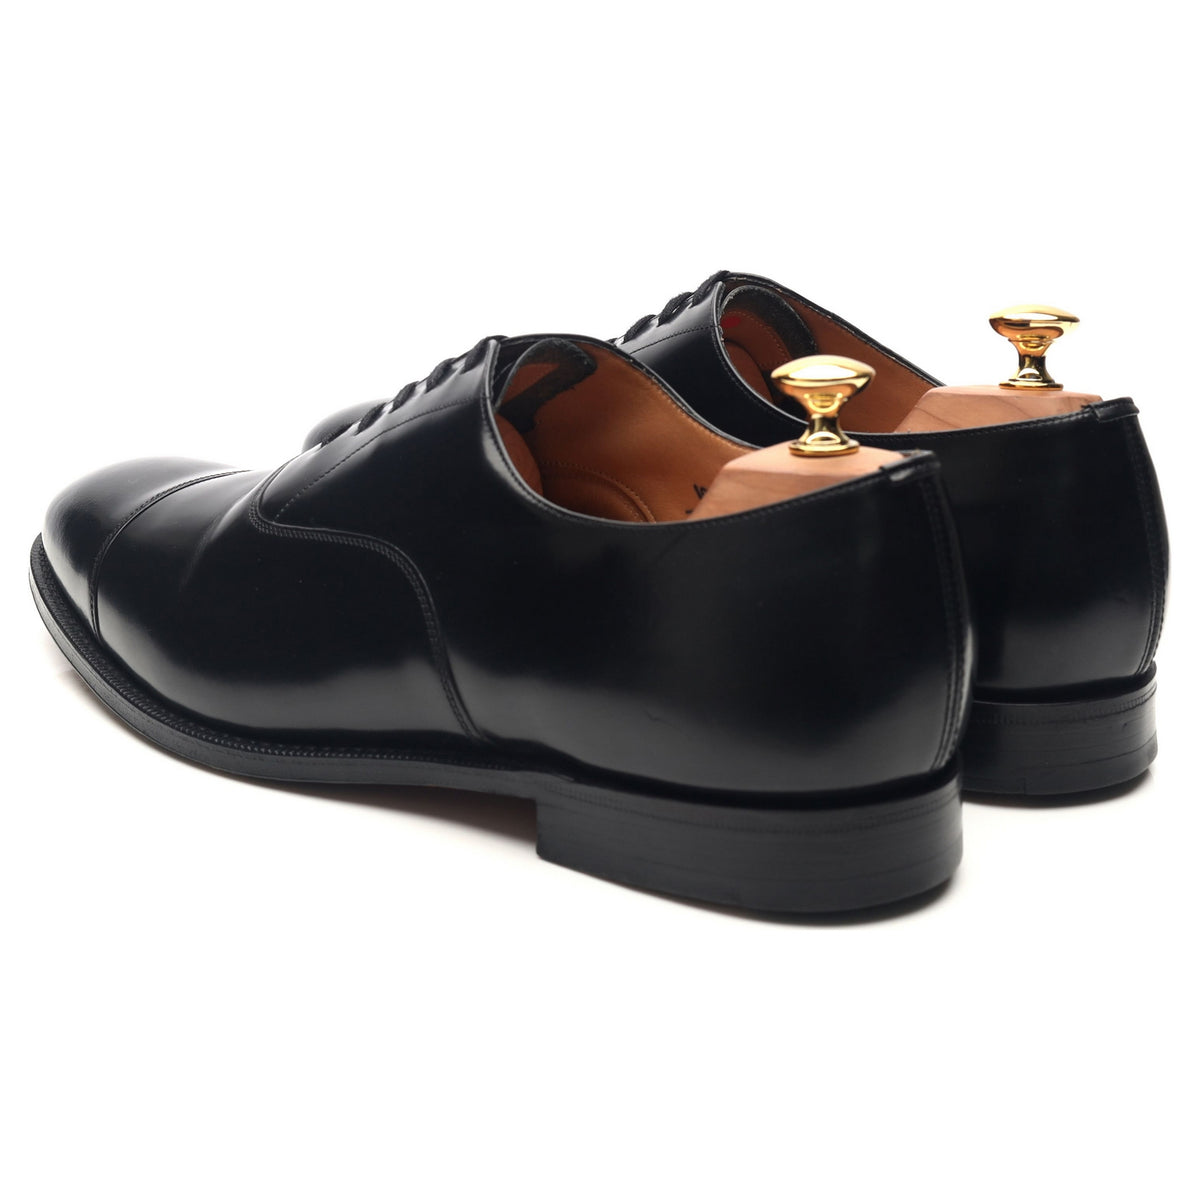 Balmoral' Black Leather Oxford UK 10.5 G - Abbot's Shoes